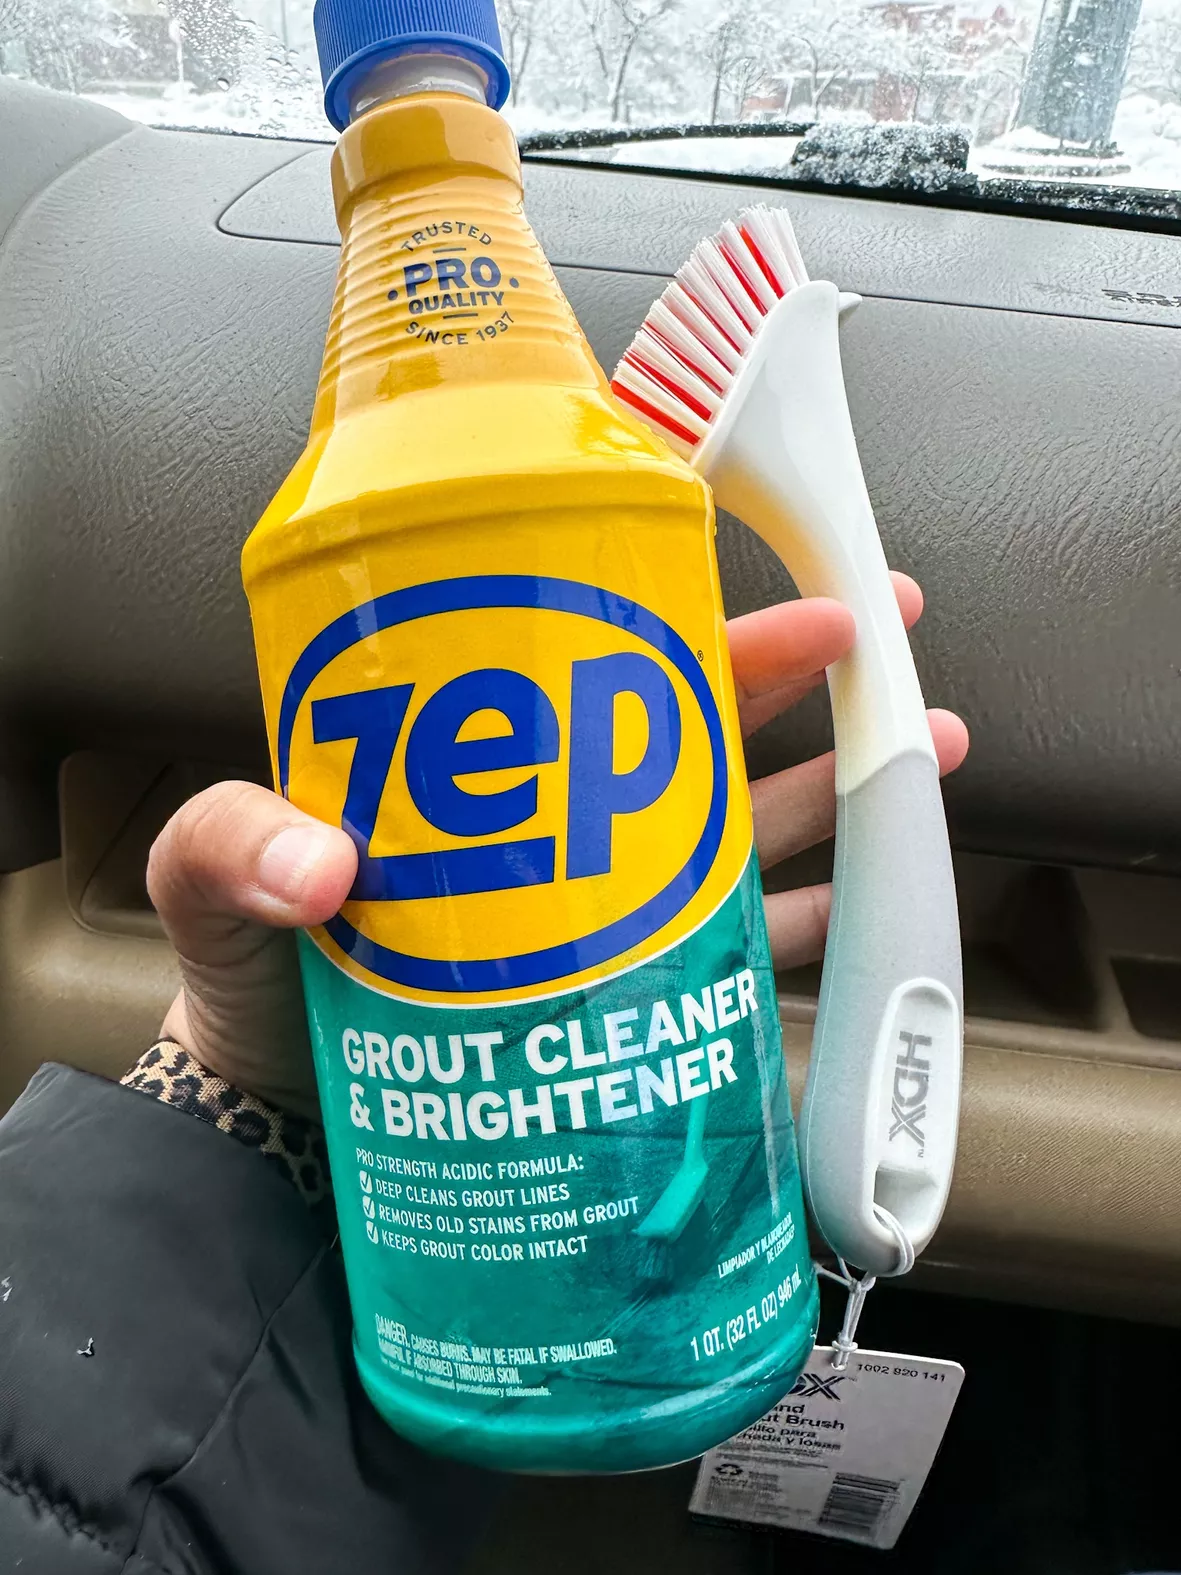 Zep Grout Cleaner and Brightener, 32 oz 